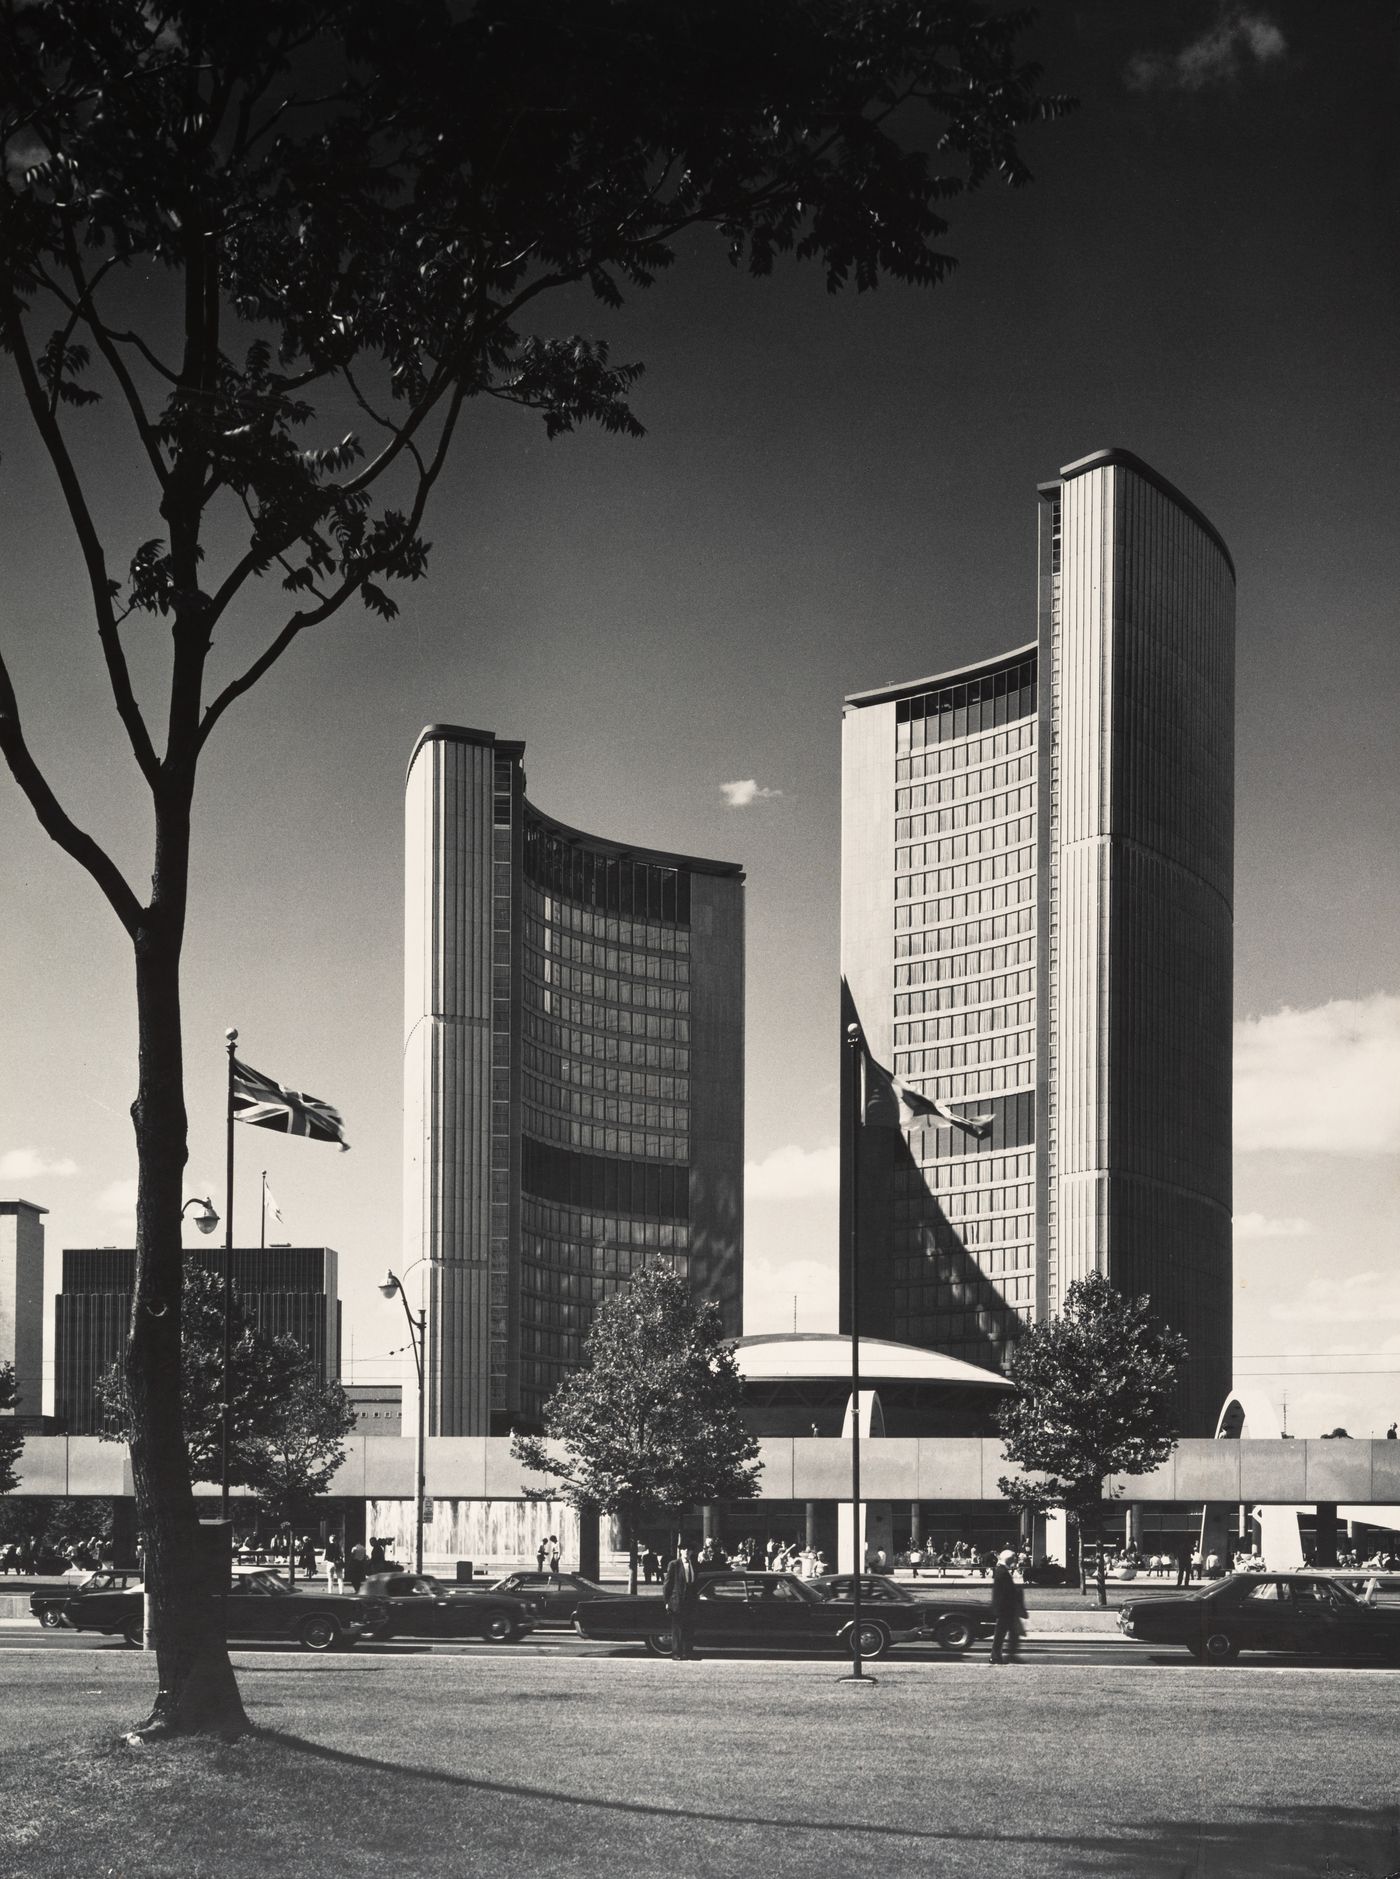 Presentation board of project photograph for Toronto City Hall and Civic Square, Toronto